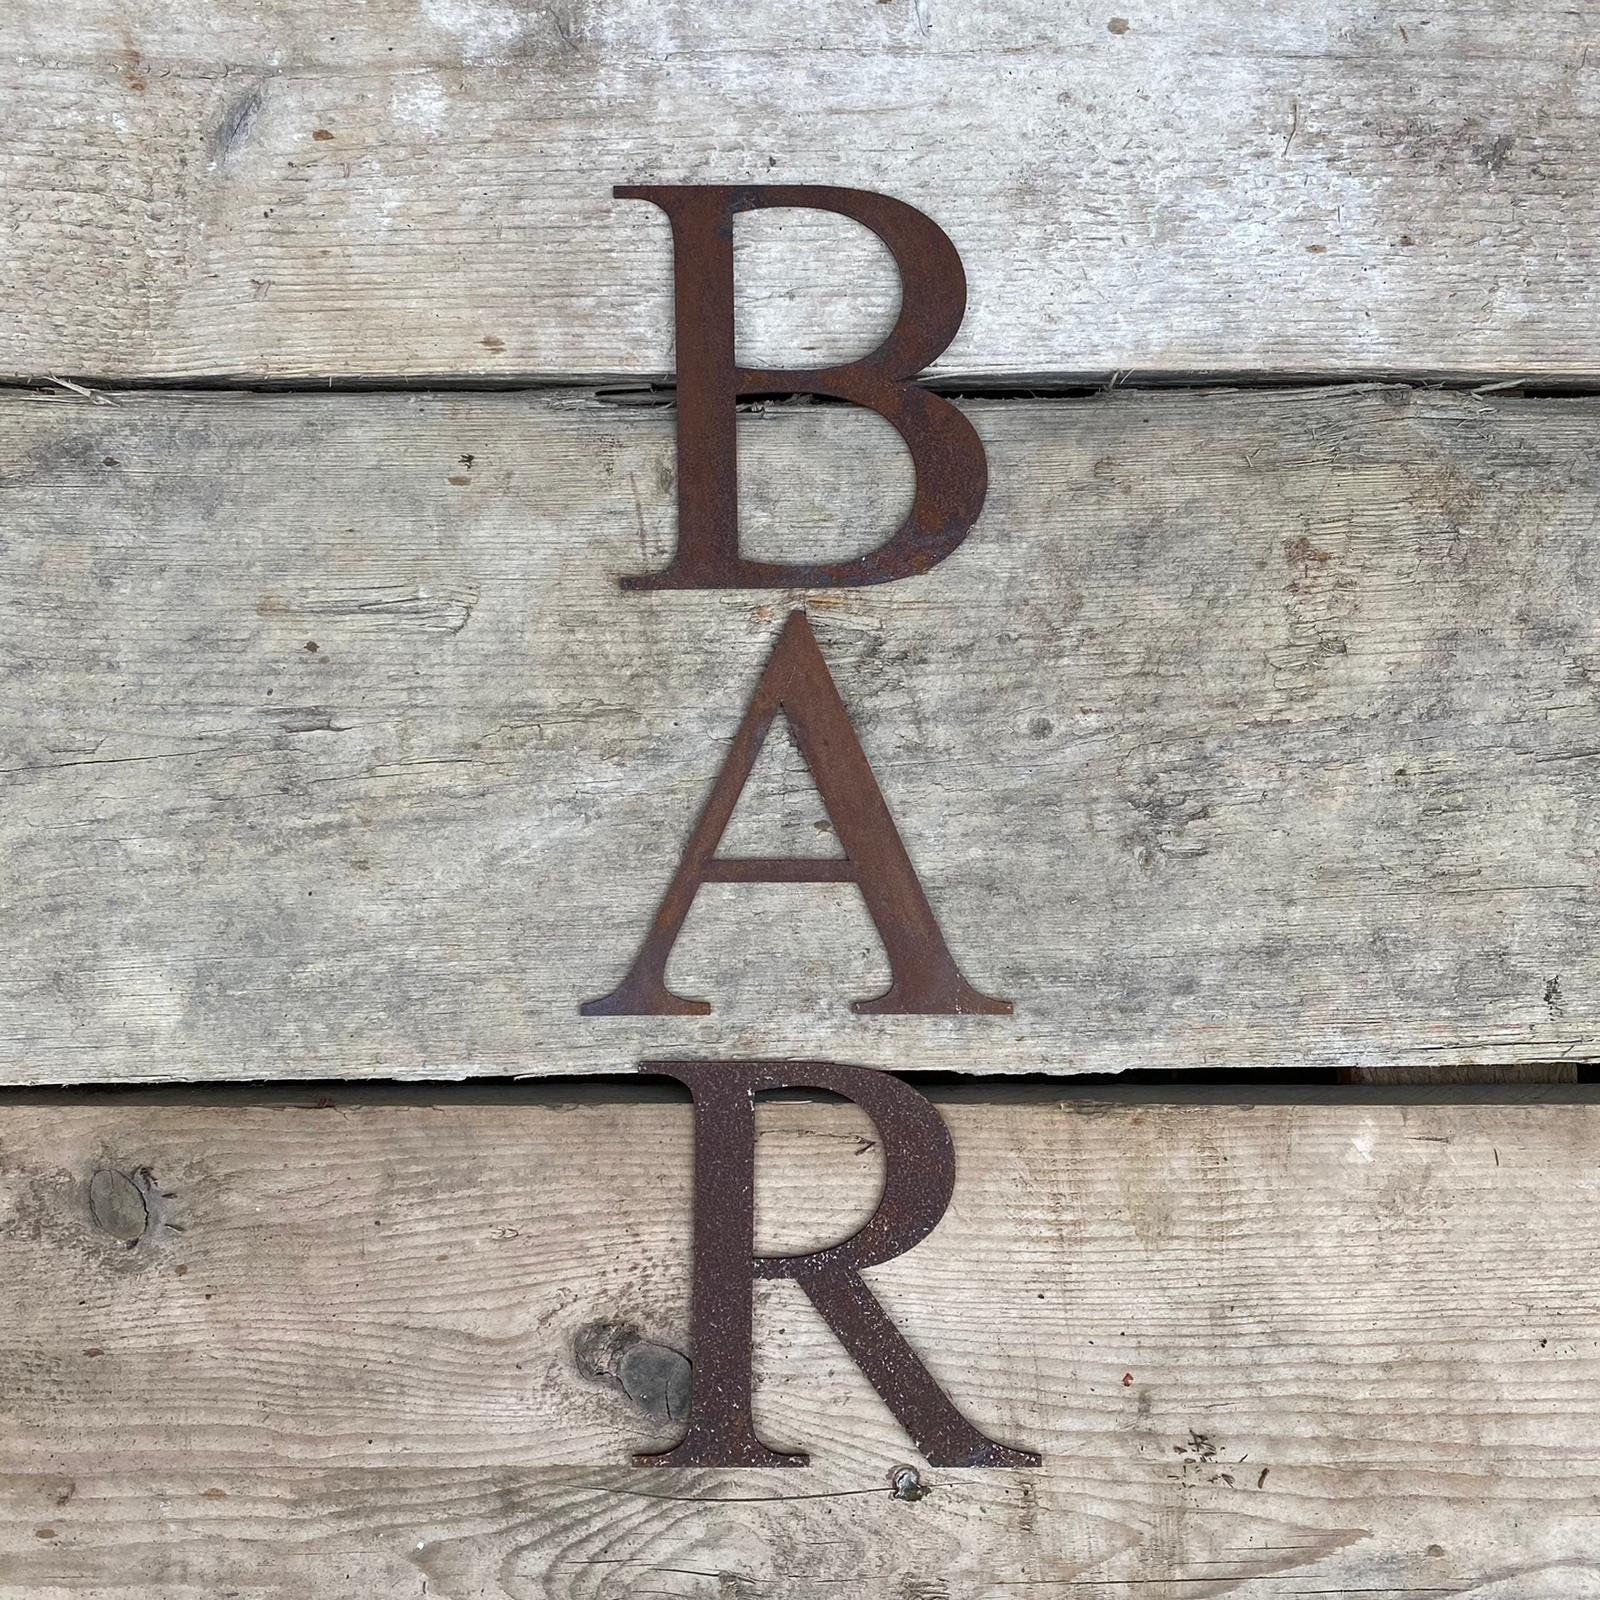 Rusty metal classic style lettering spelling out BAR